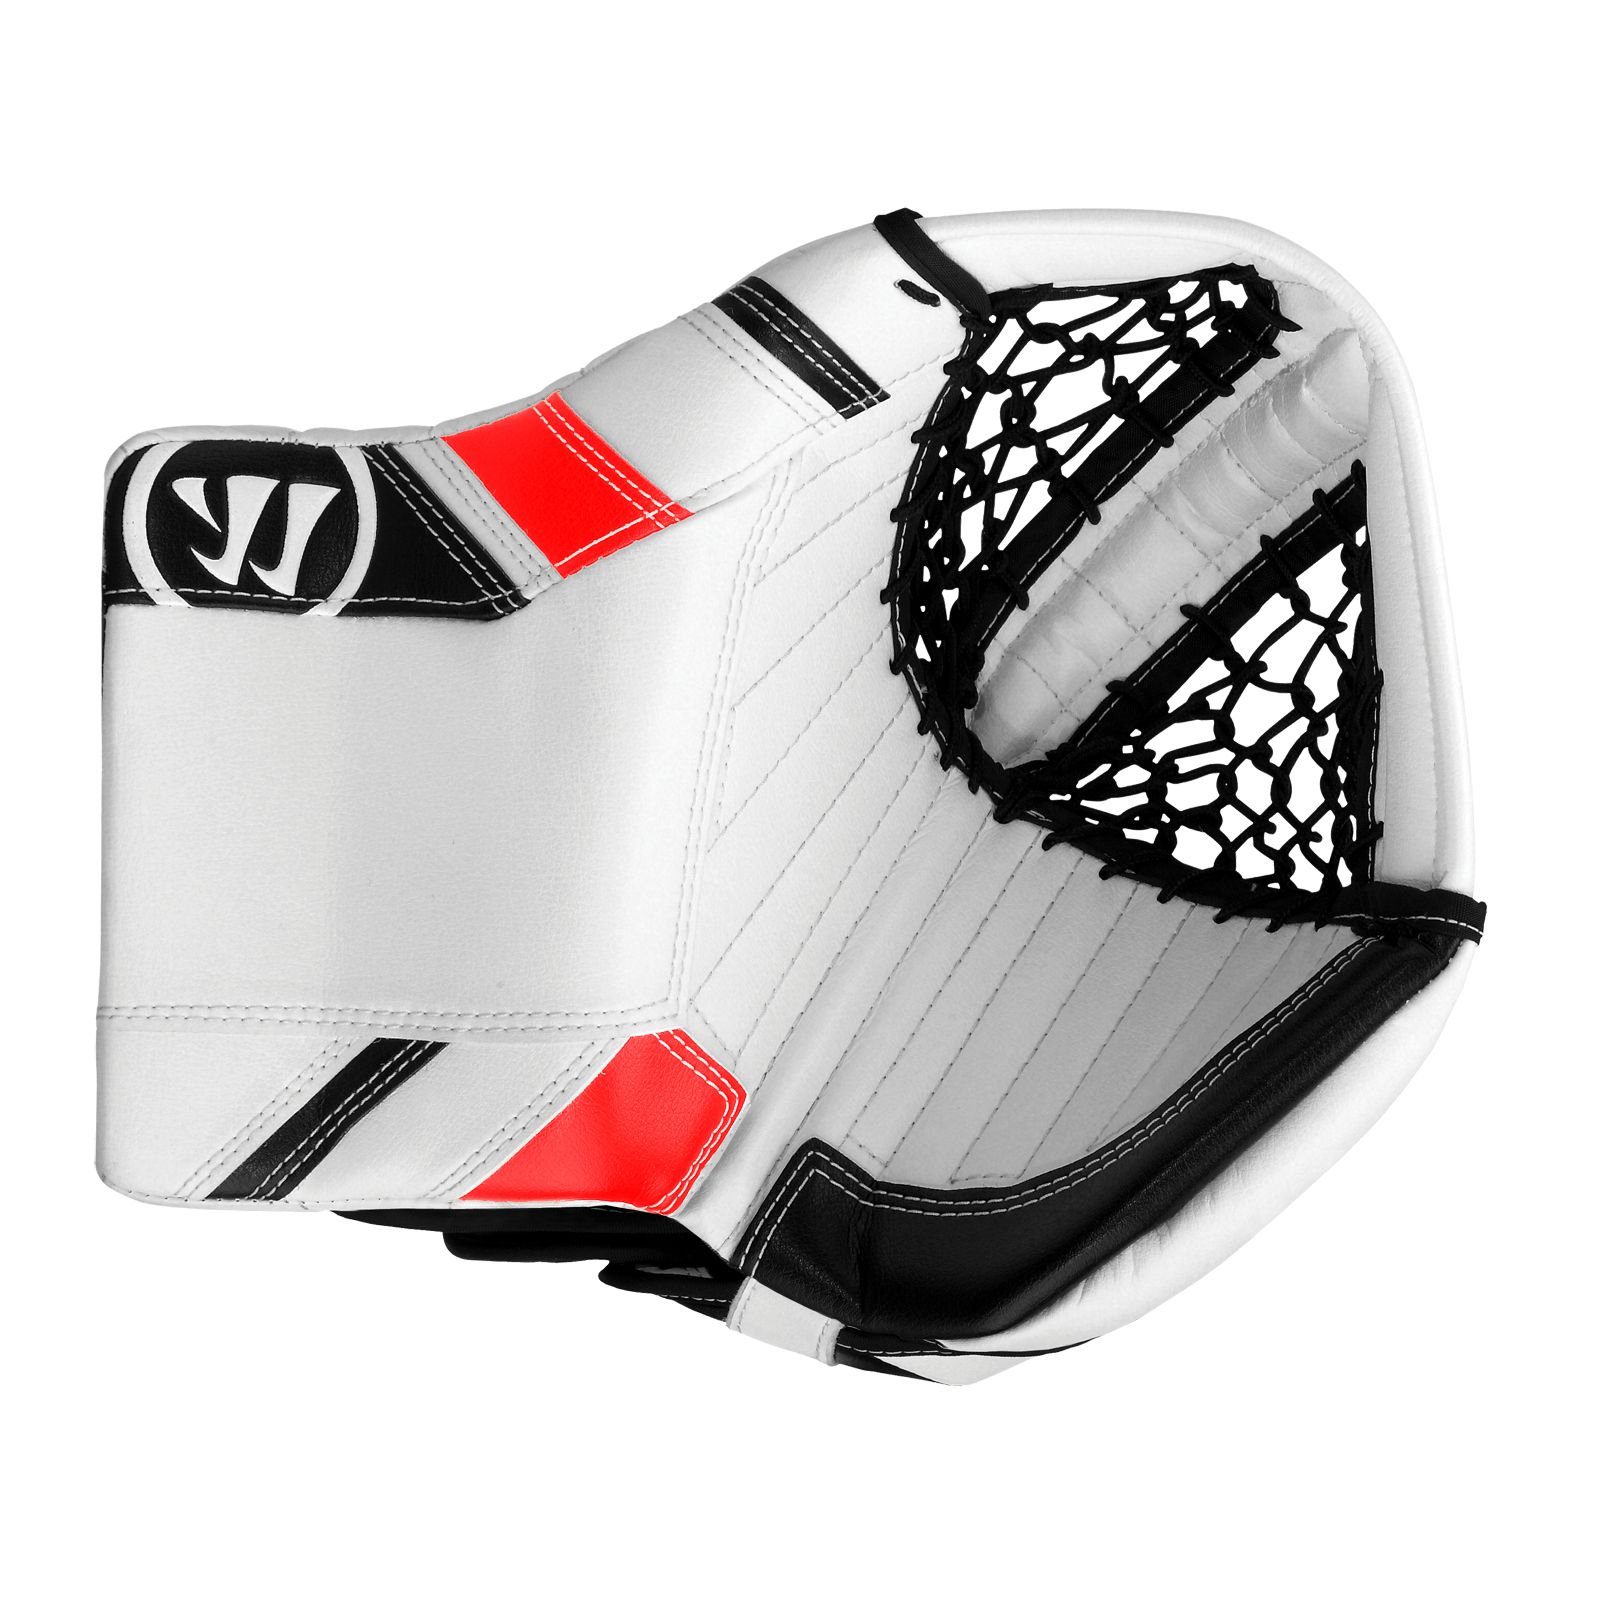 Ritual G3 Int. Trapper, White with Black & Red image number 0